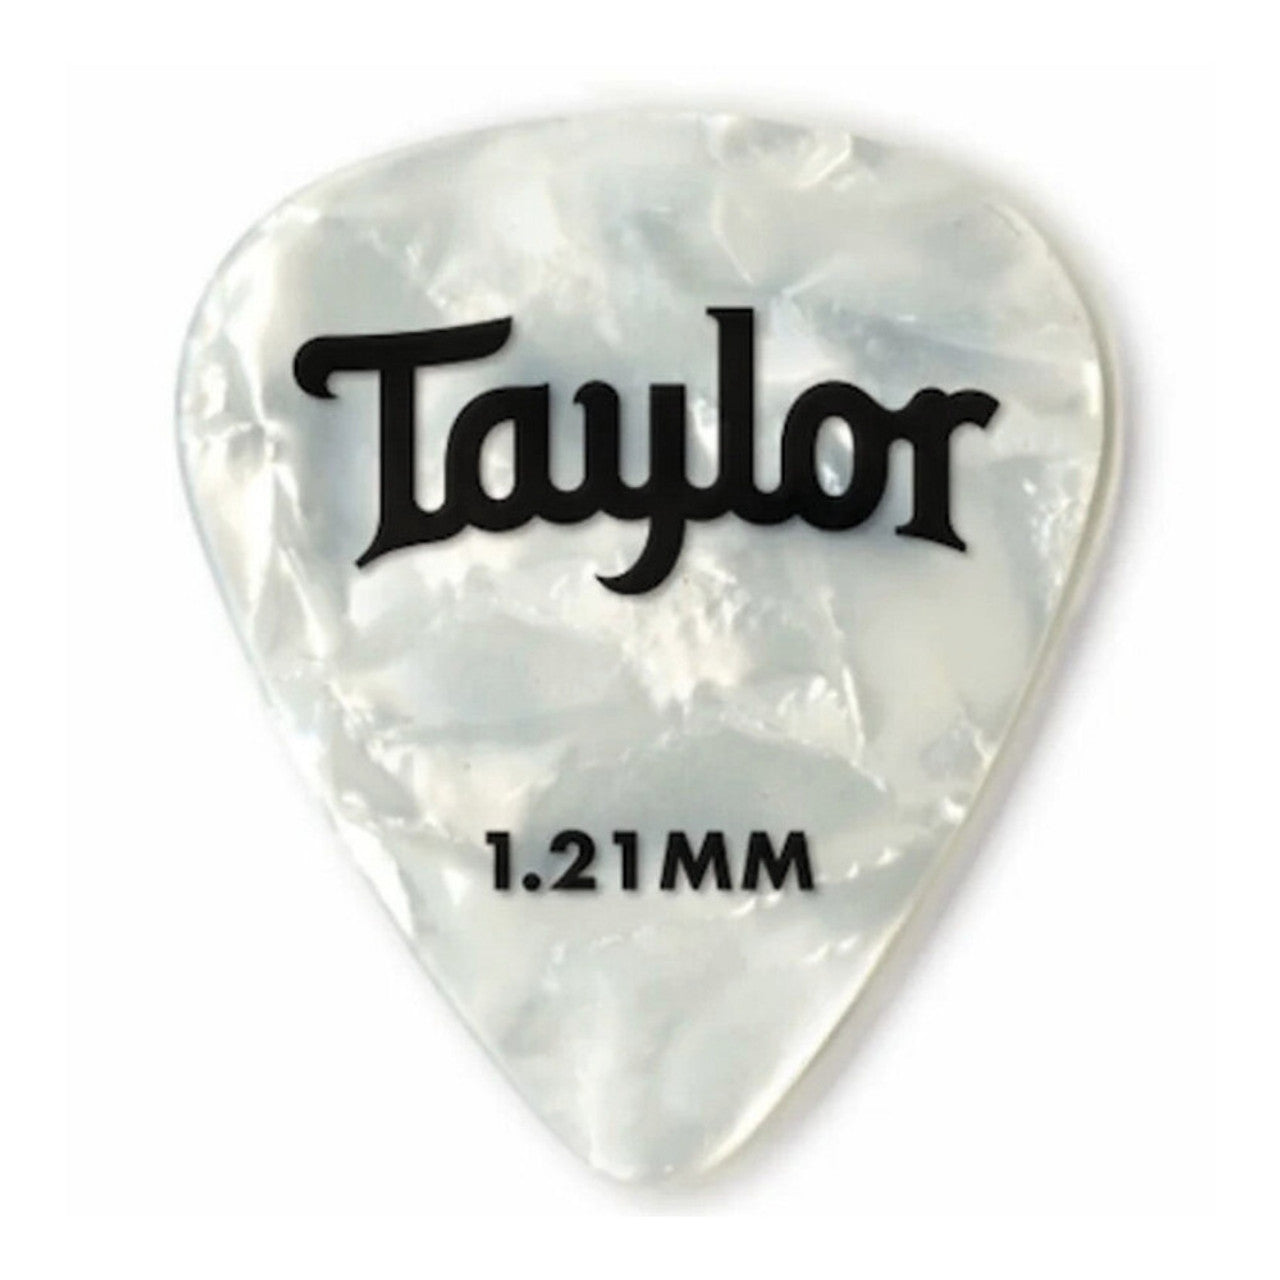 Taylor Celluloid 351 Guitar Picks, White Pearl, 12-Pack 1.21mm